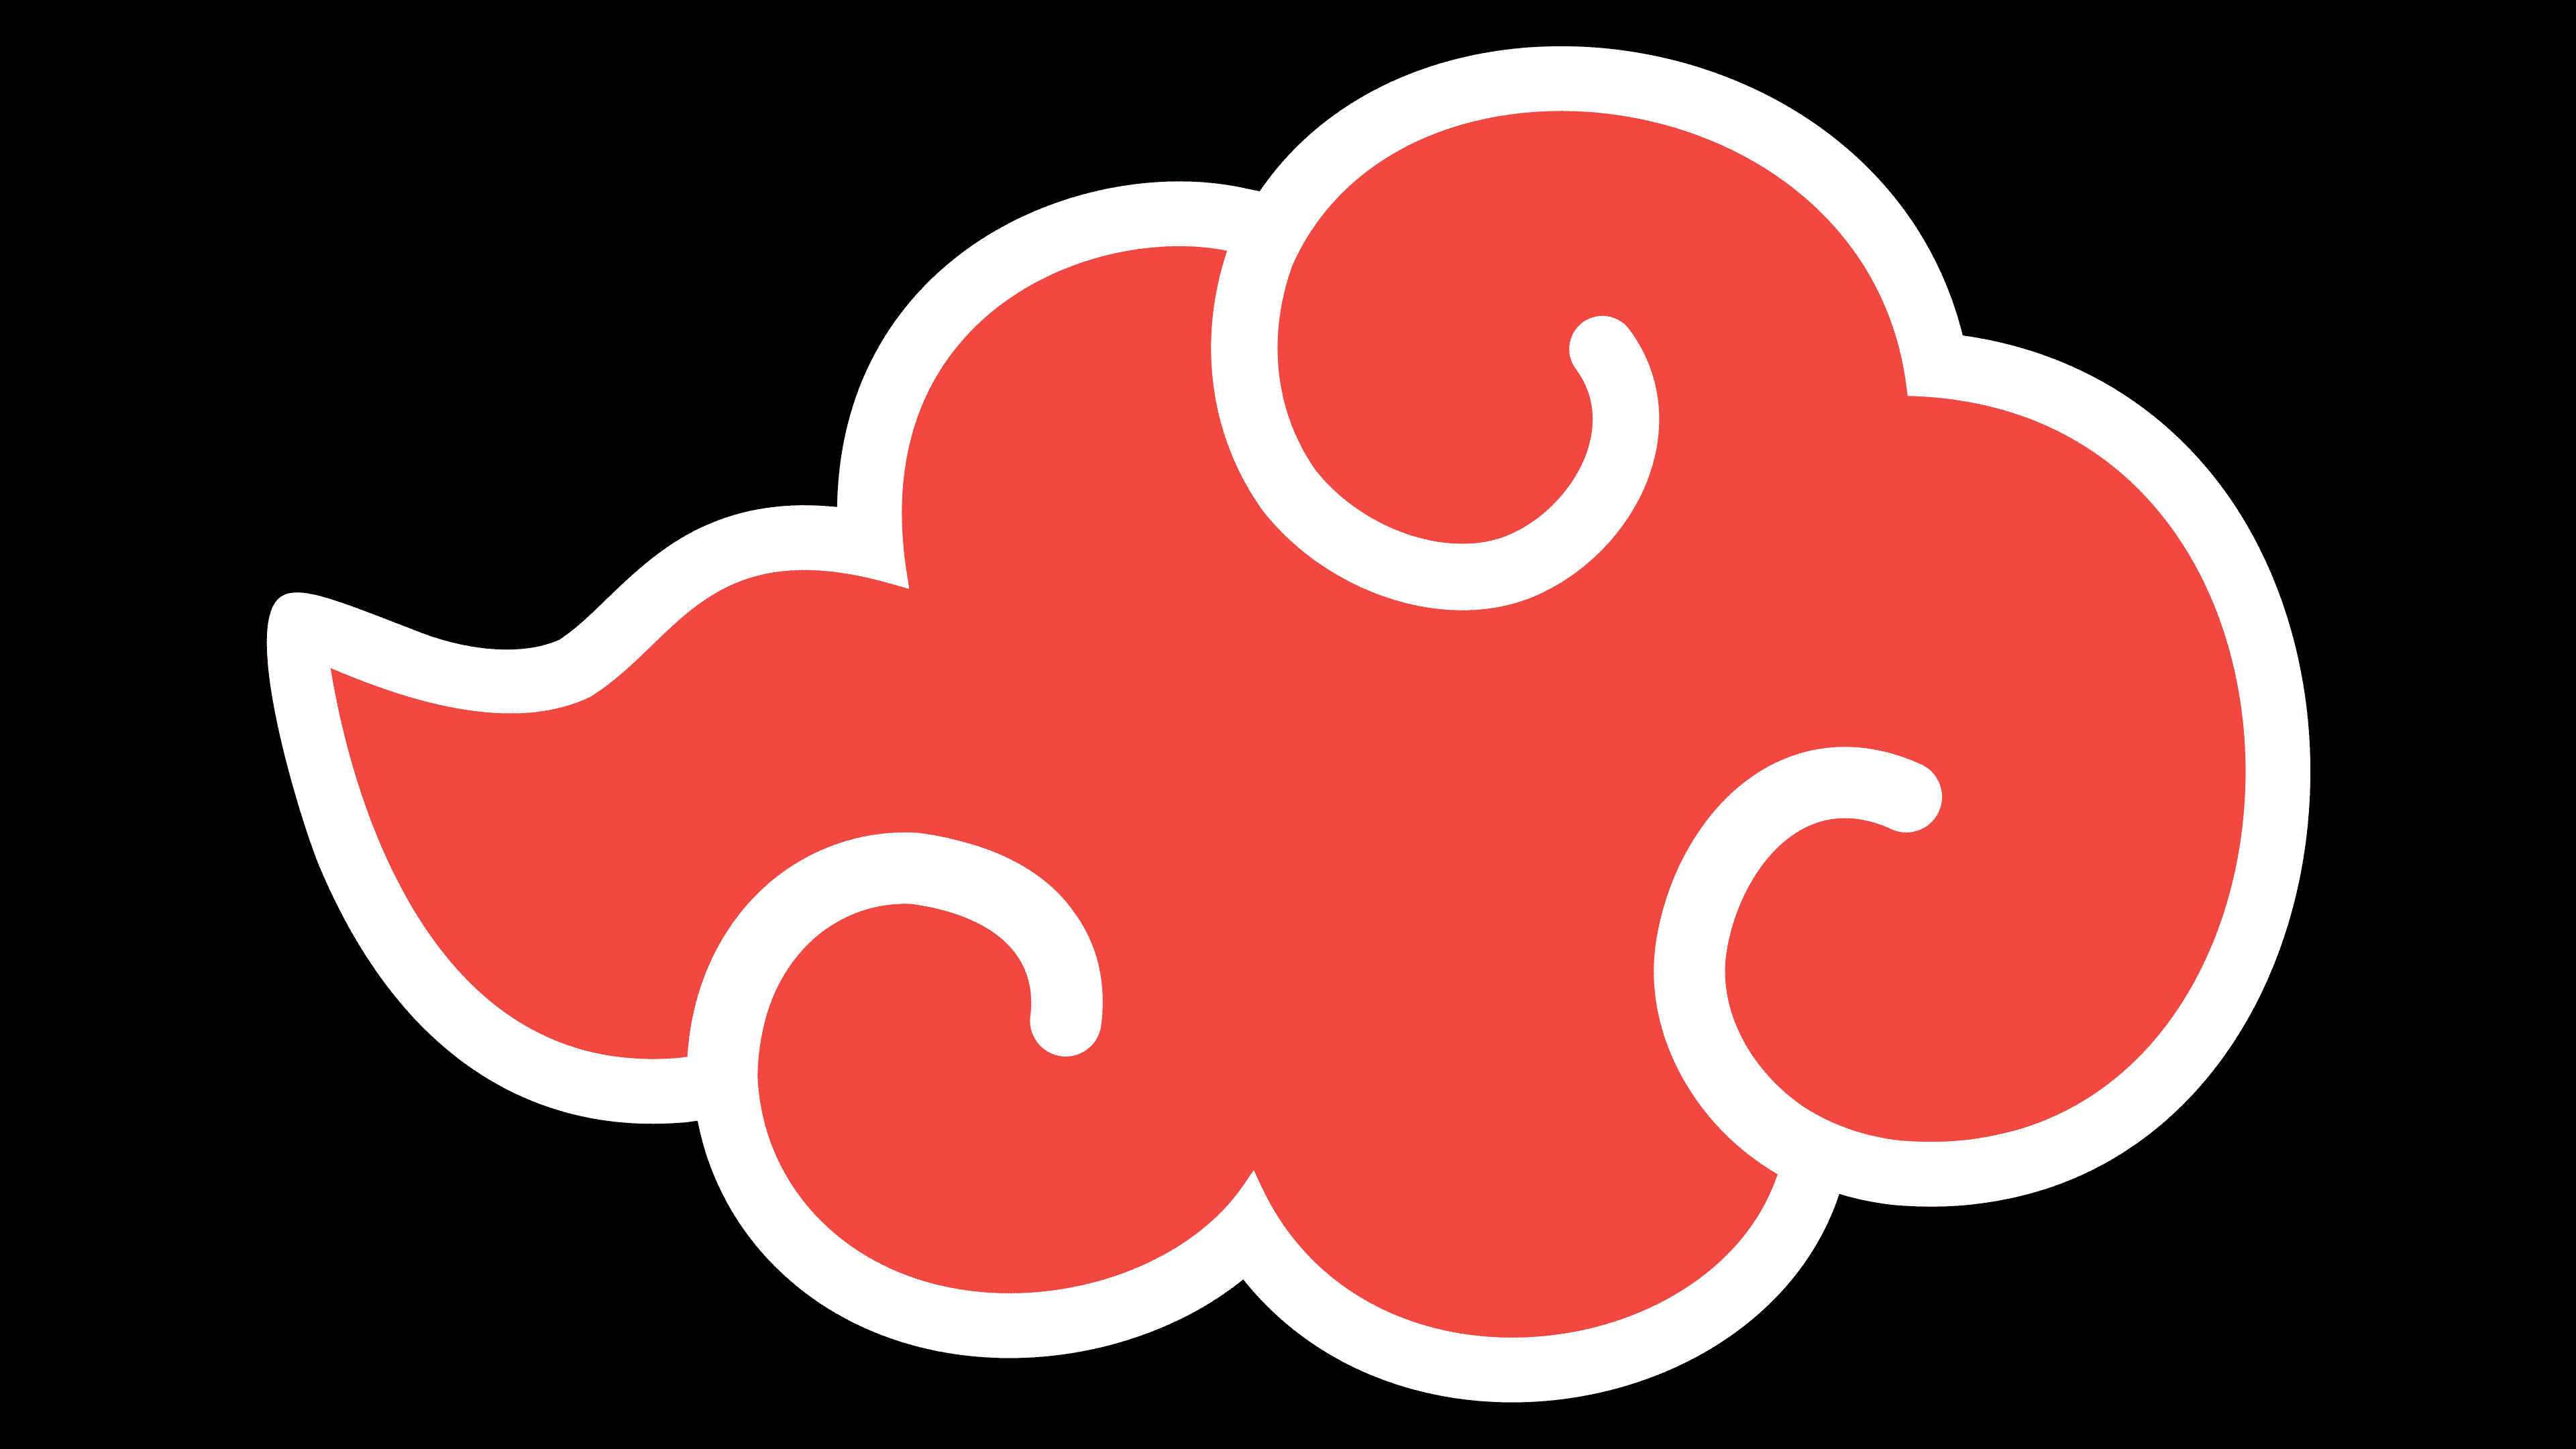 Akatsuki Anime Cloud Decal Custom Colors and Sizes Available. - Etsy Ireland